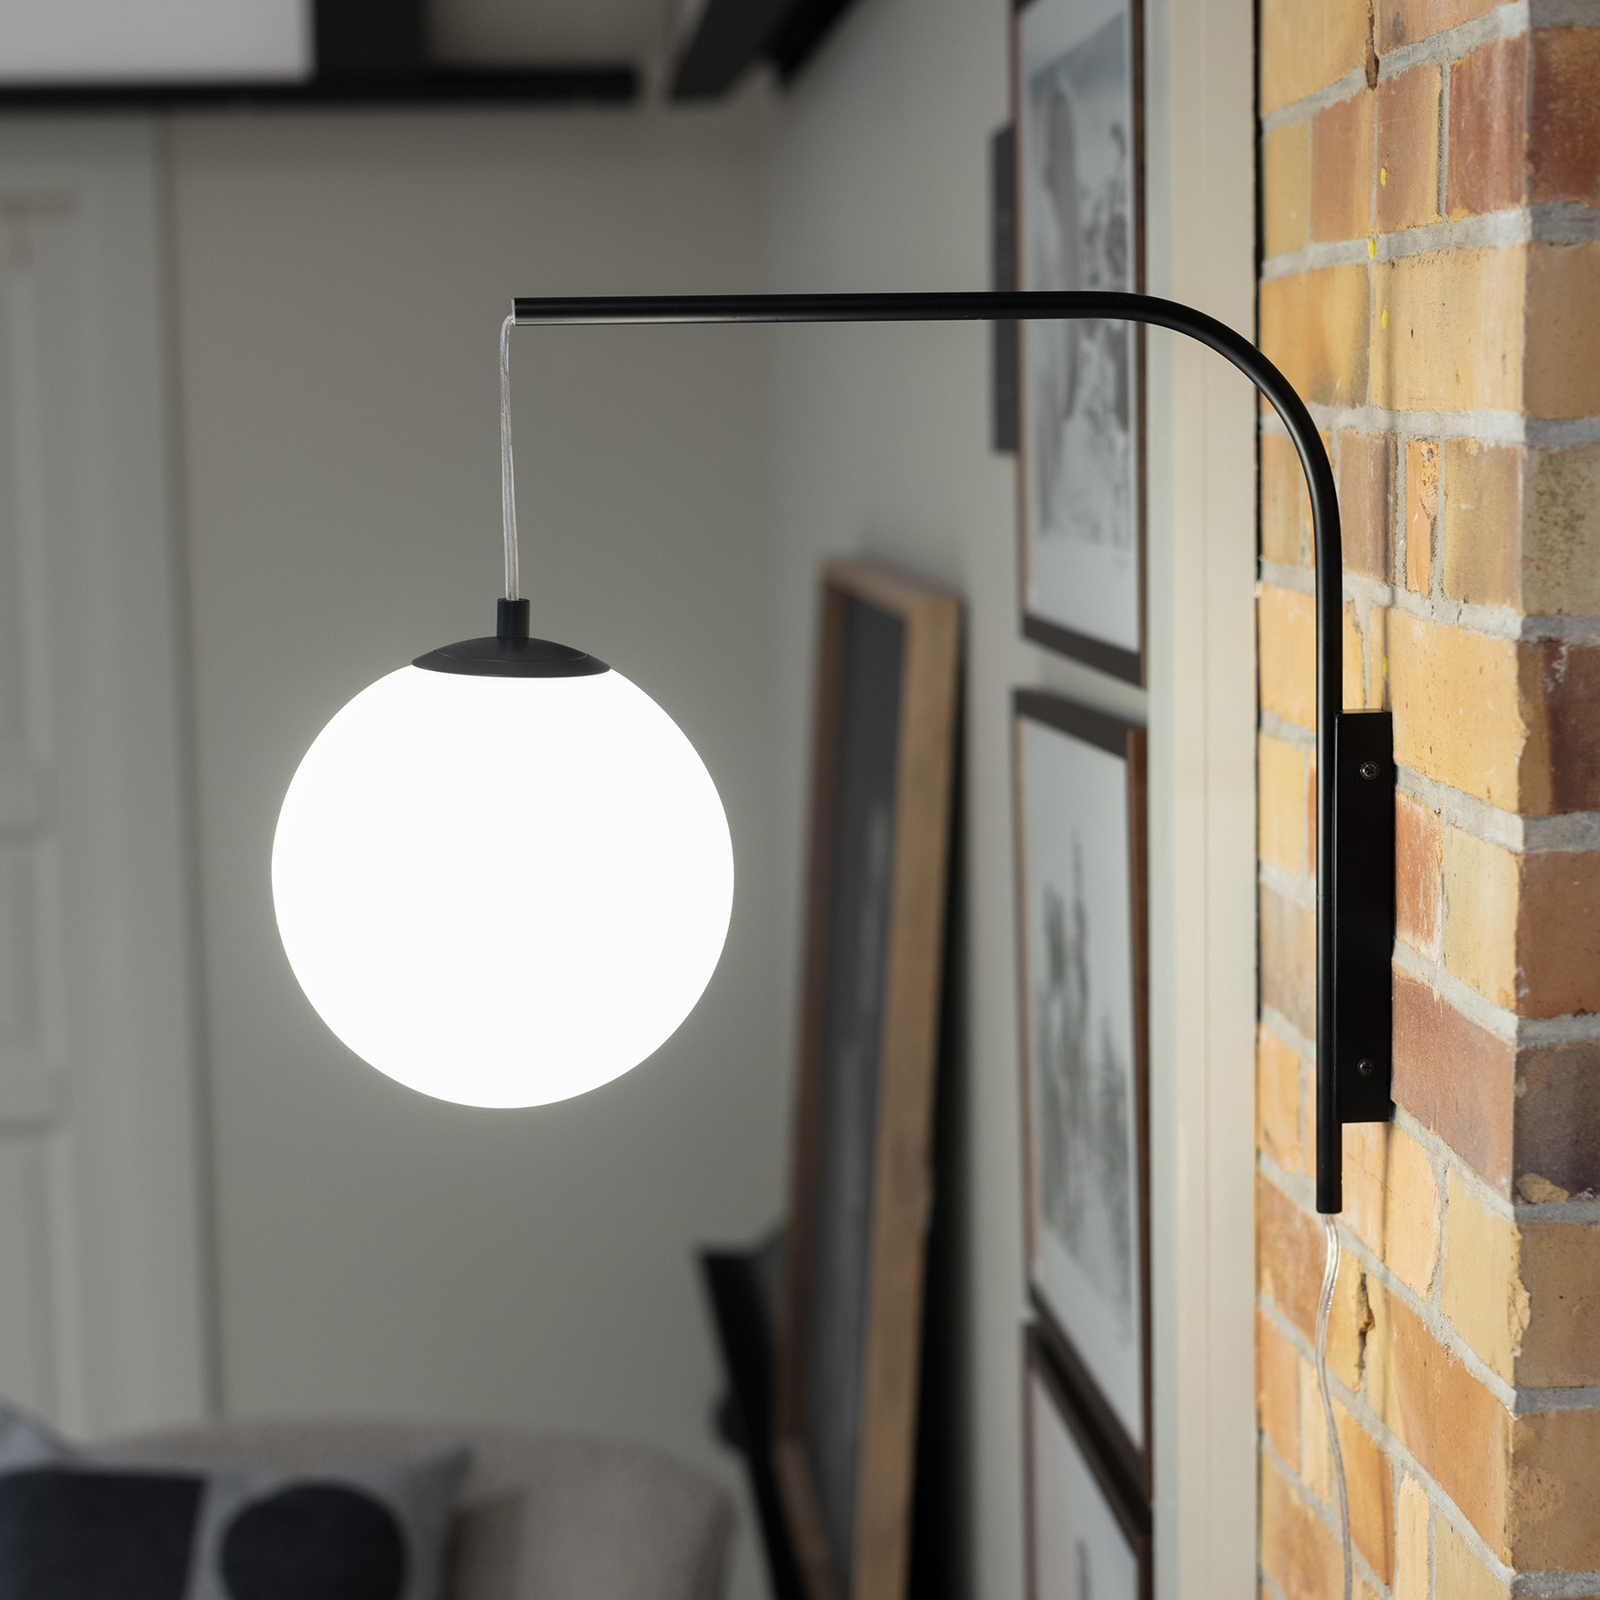 Dione wall light with a plug, black/white